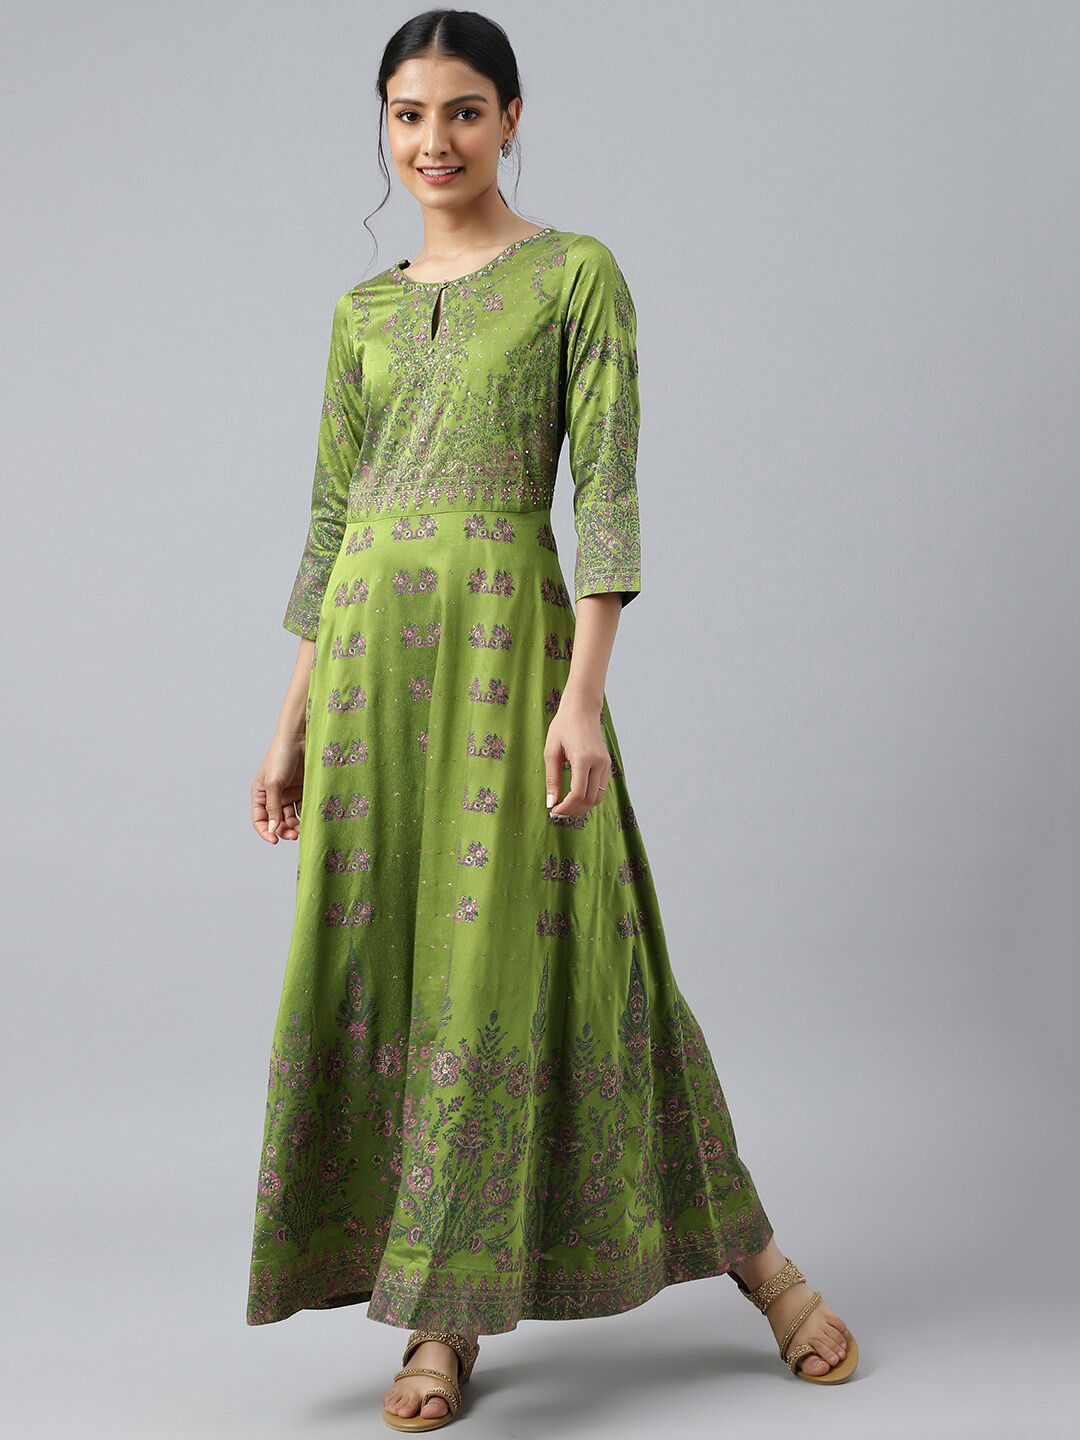 W Green & Pink Floral Keyhole Neck Ethnic Maxi Dress Price in India